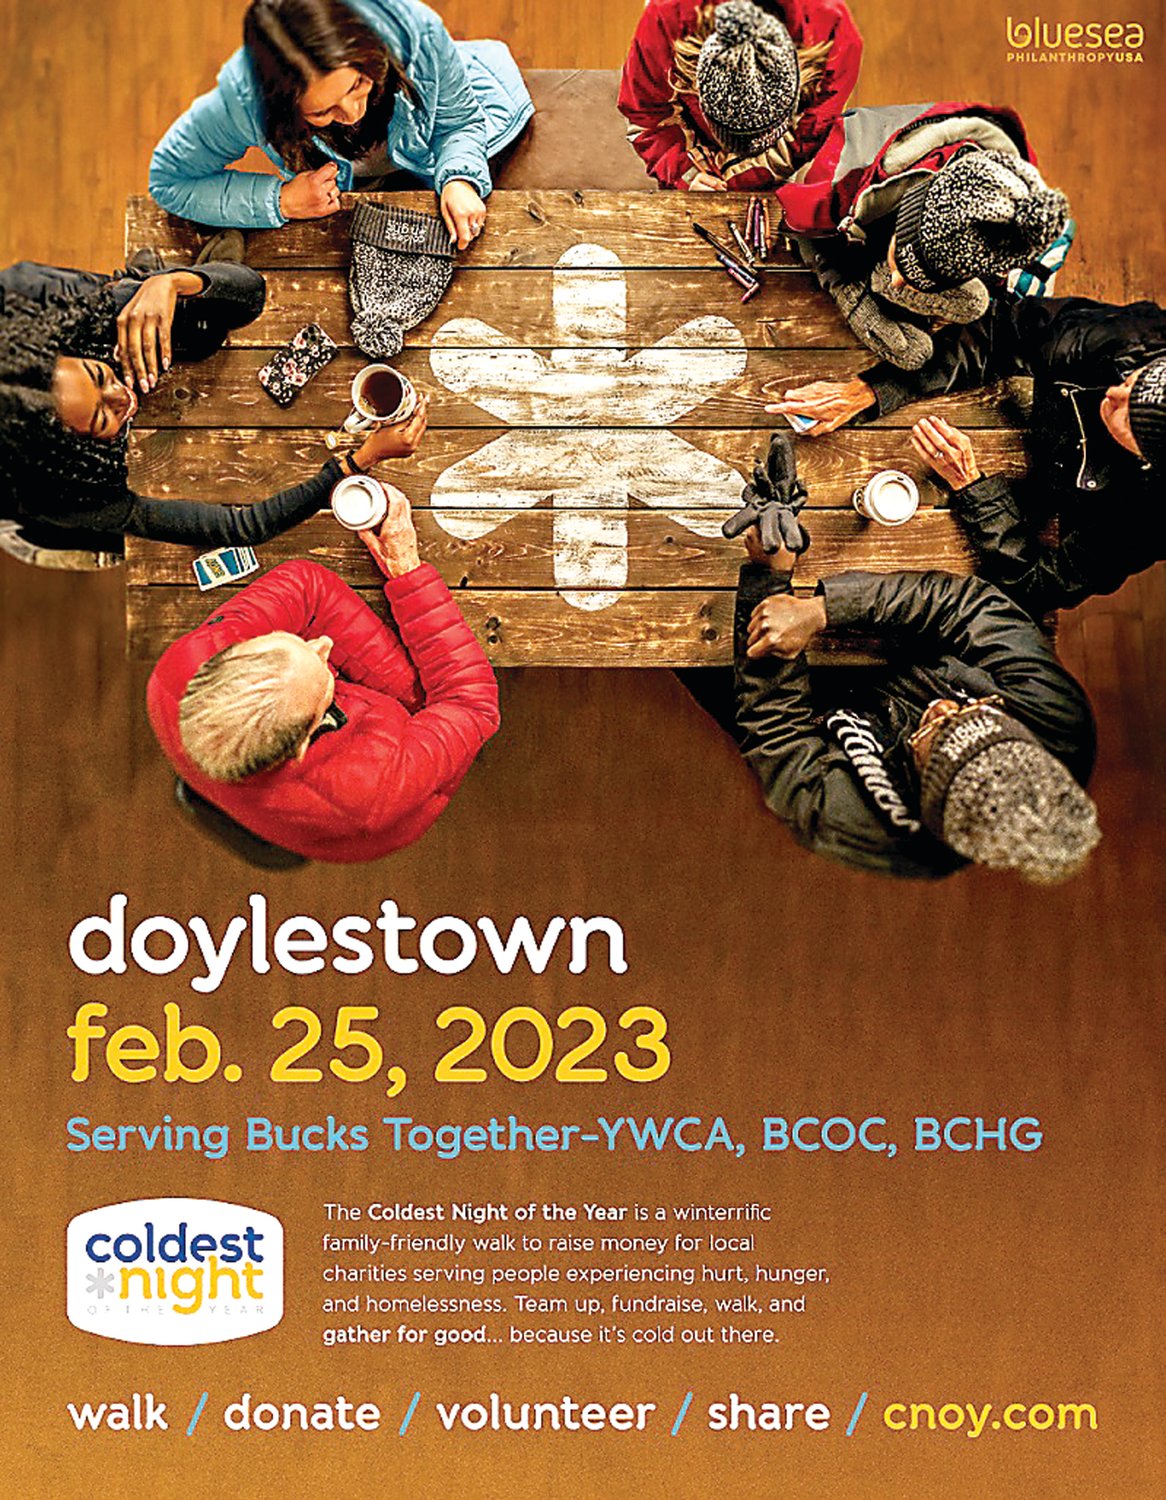 The Bucks County YWCA, partnering with the Bucks County Housing Group and the Bucks County Opportunity Council, is sponsoring Pennsylvania’s first Coldest Night of the Year Walk Saturday in Doylestown.